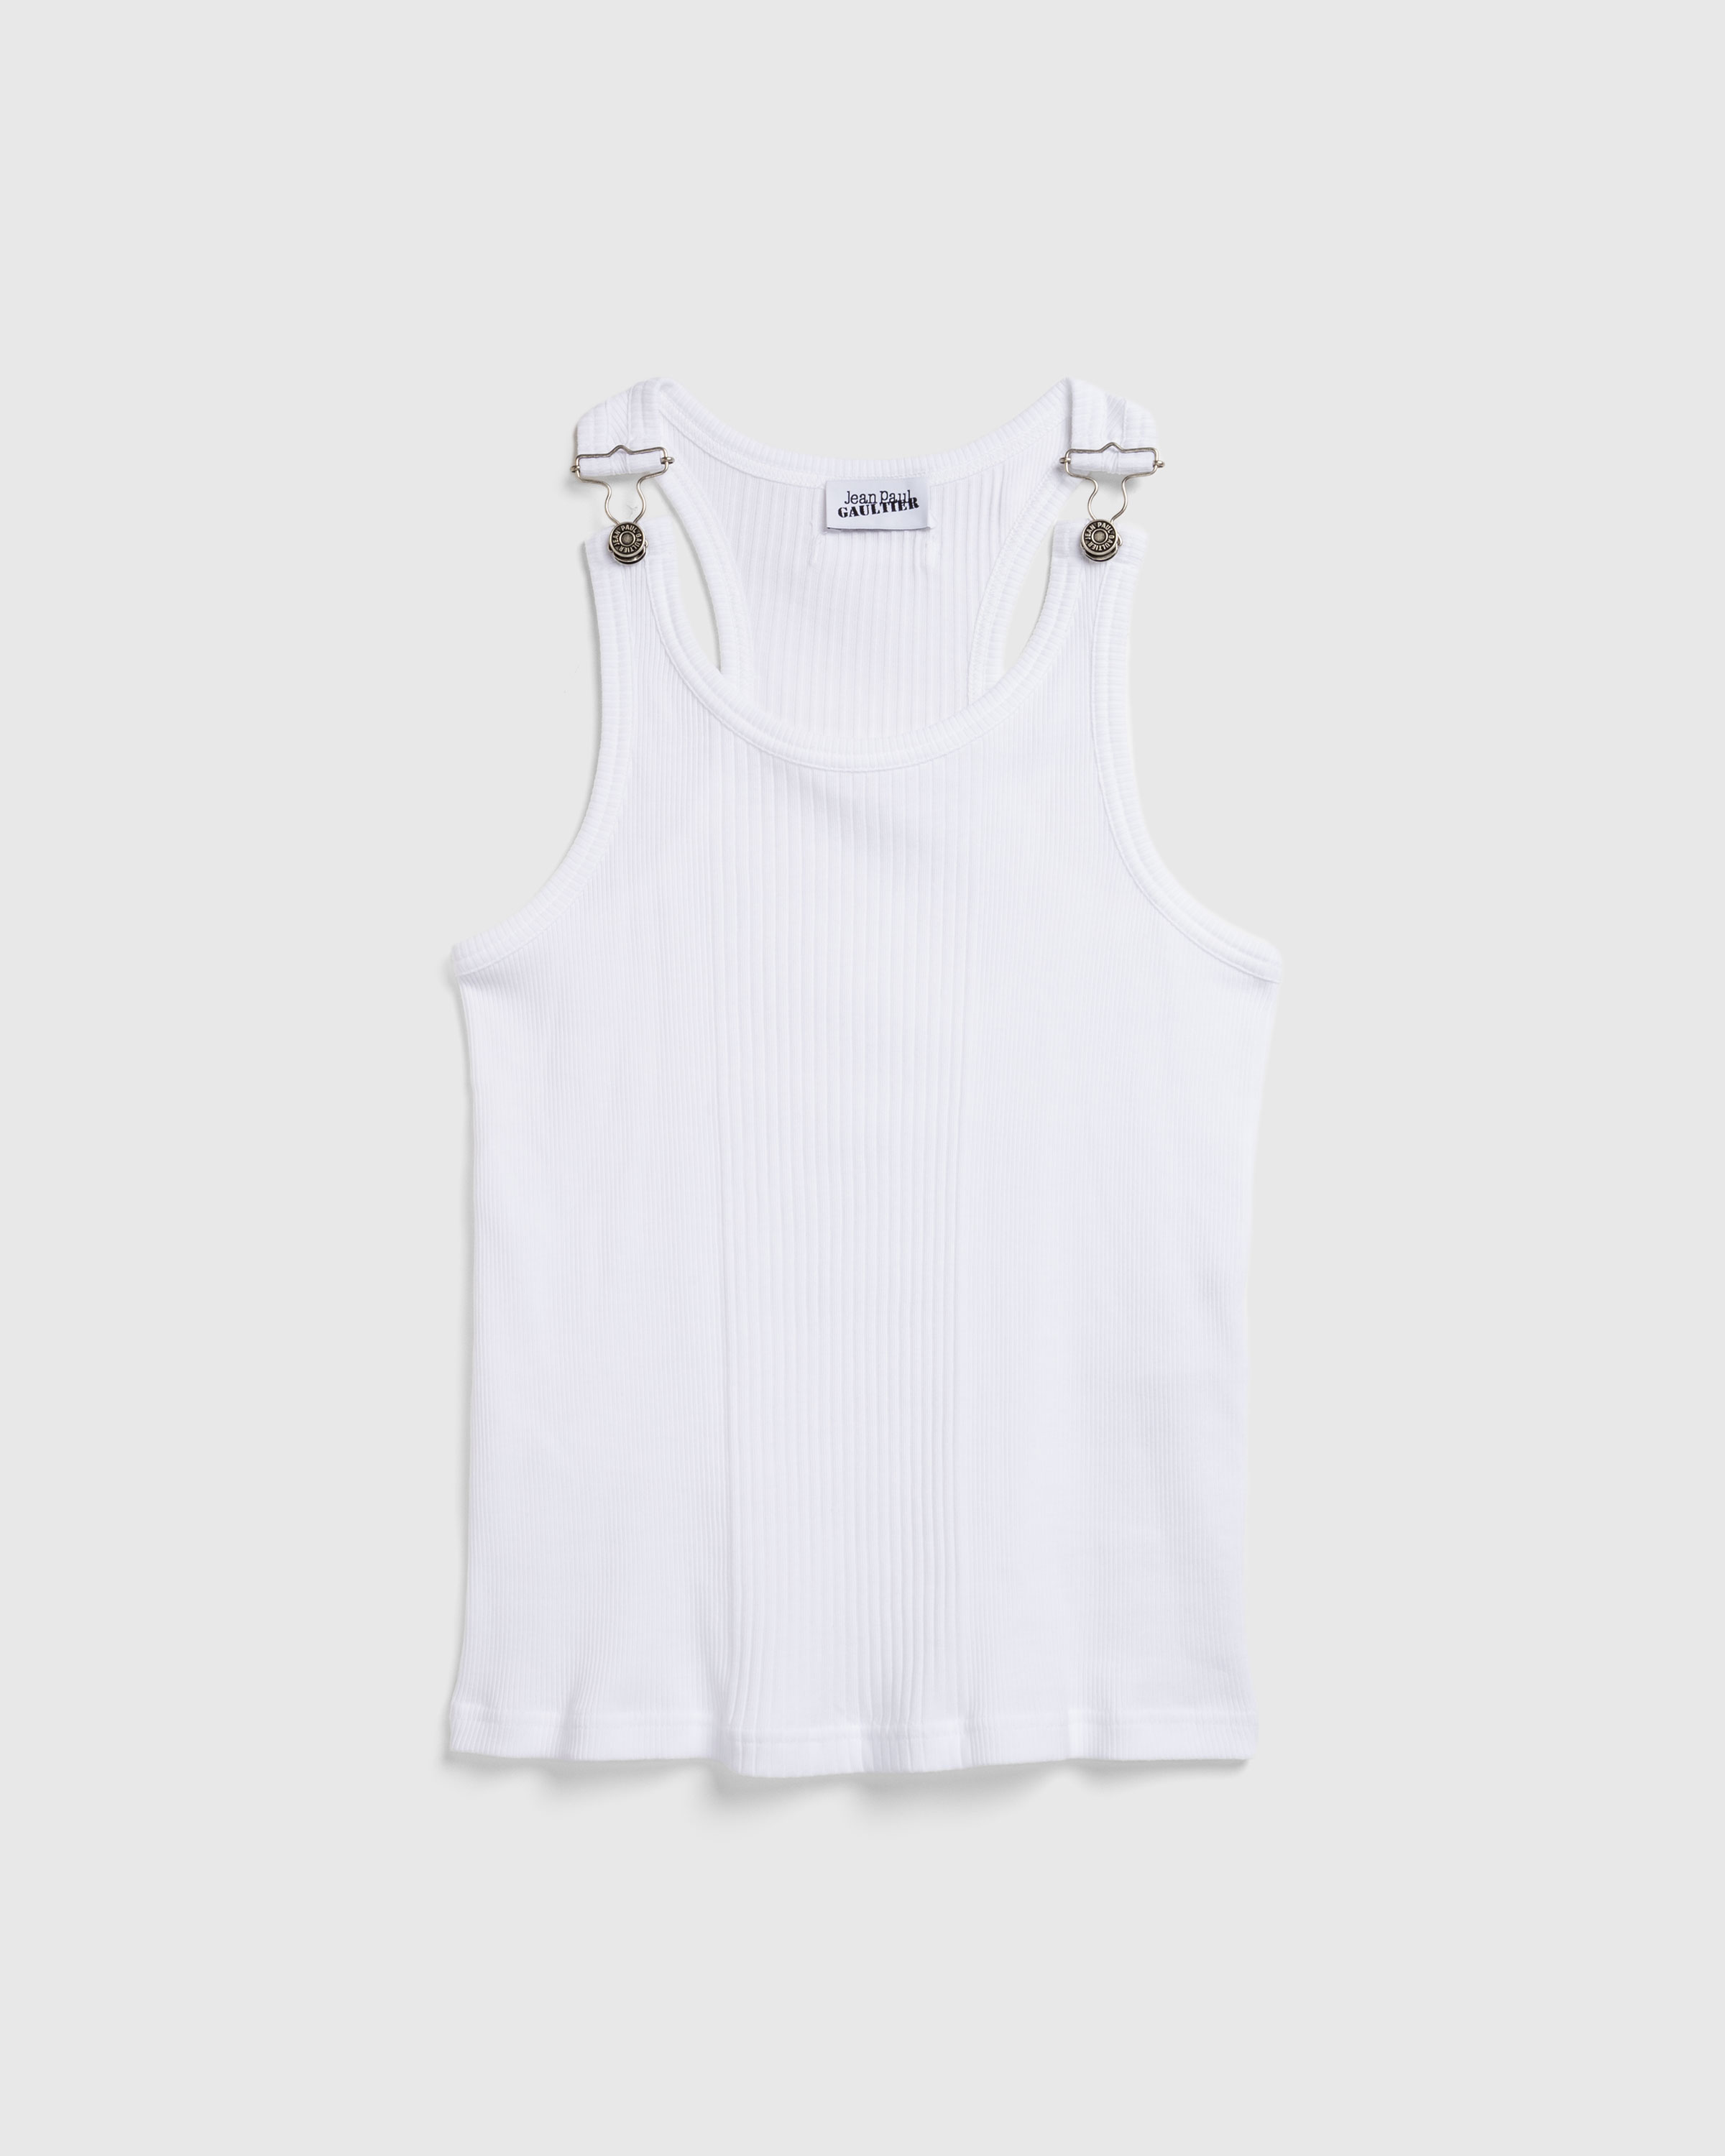 Jean Paul Gaultier – Ribbed Tank Top With Overall Buckles White - Tank Tops - White - Image 1